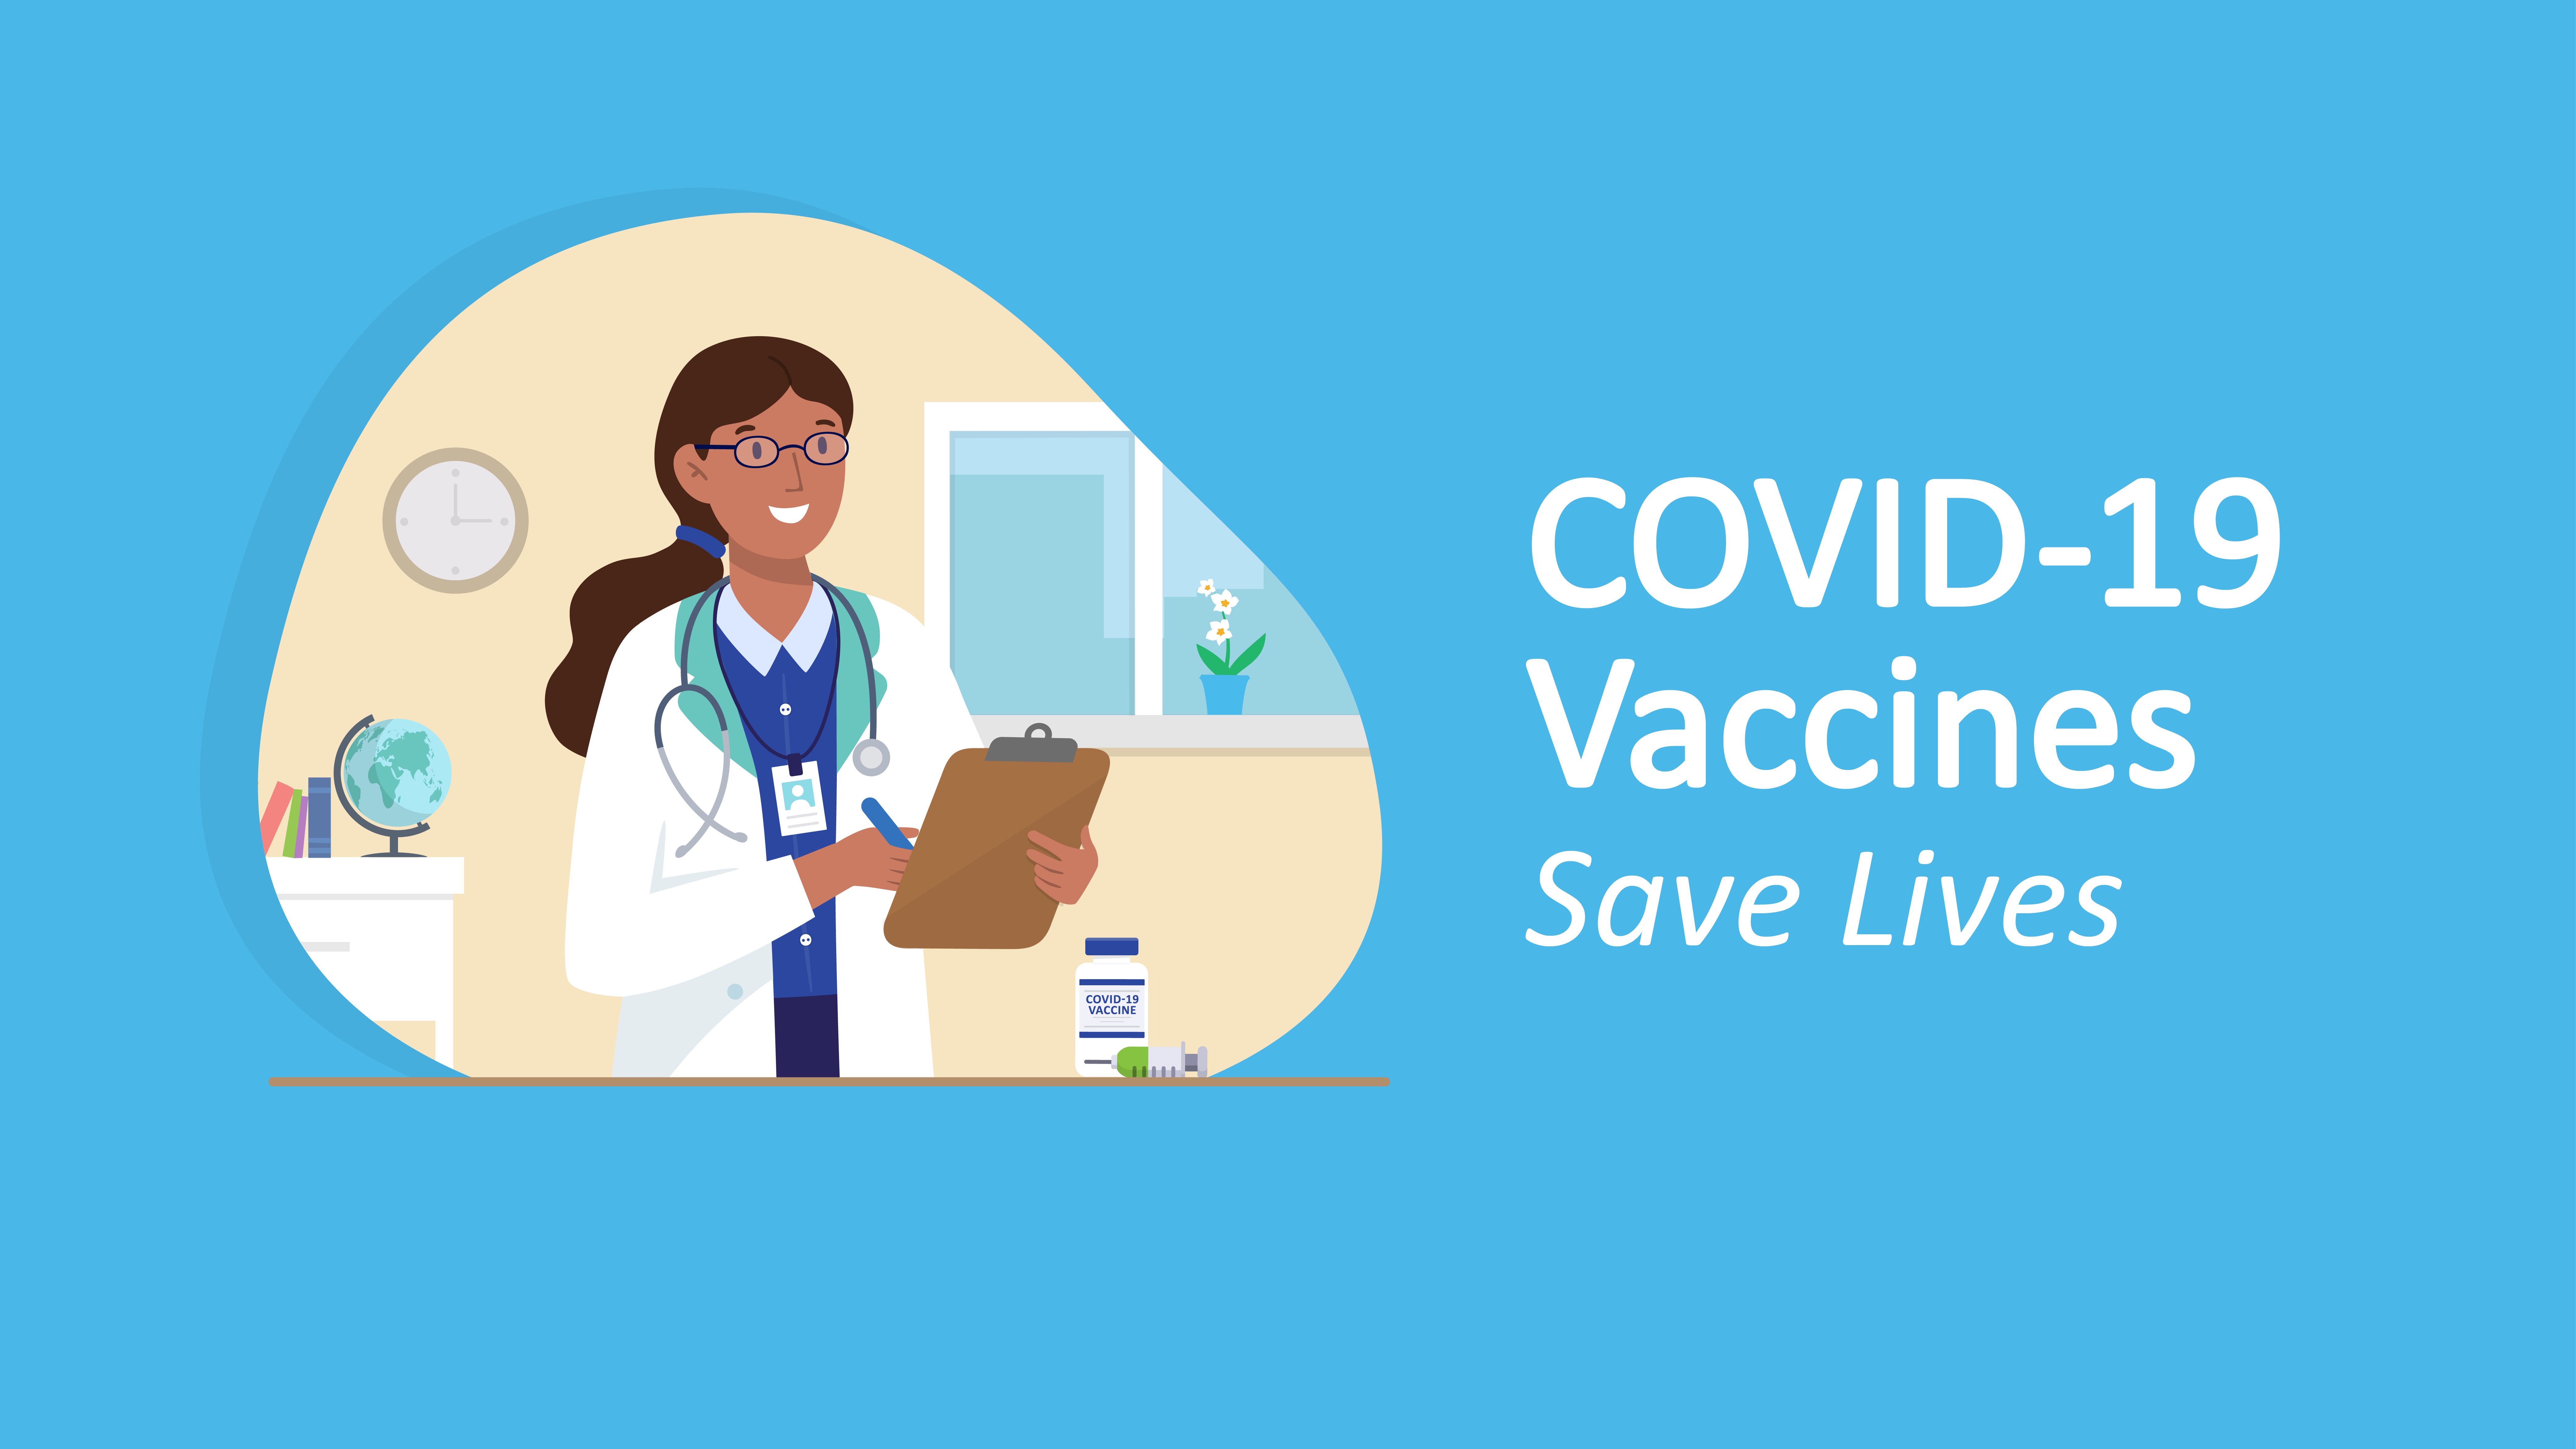 COVID-19 Vaccines Save Lives